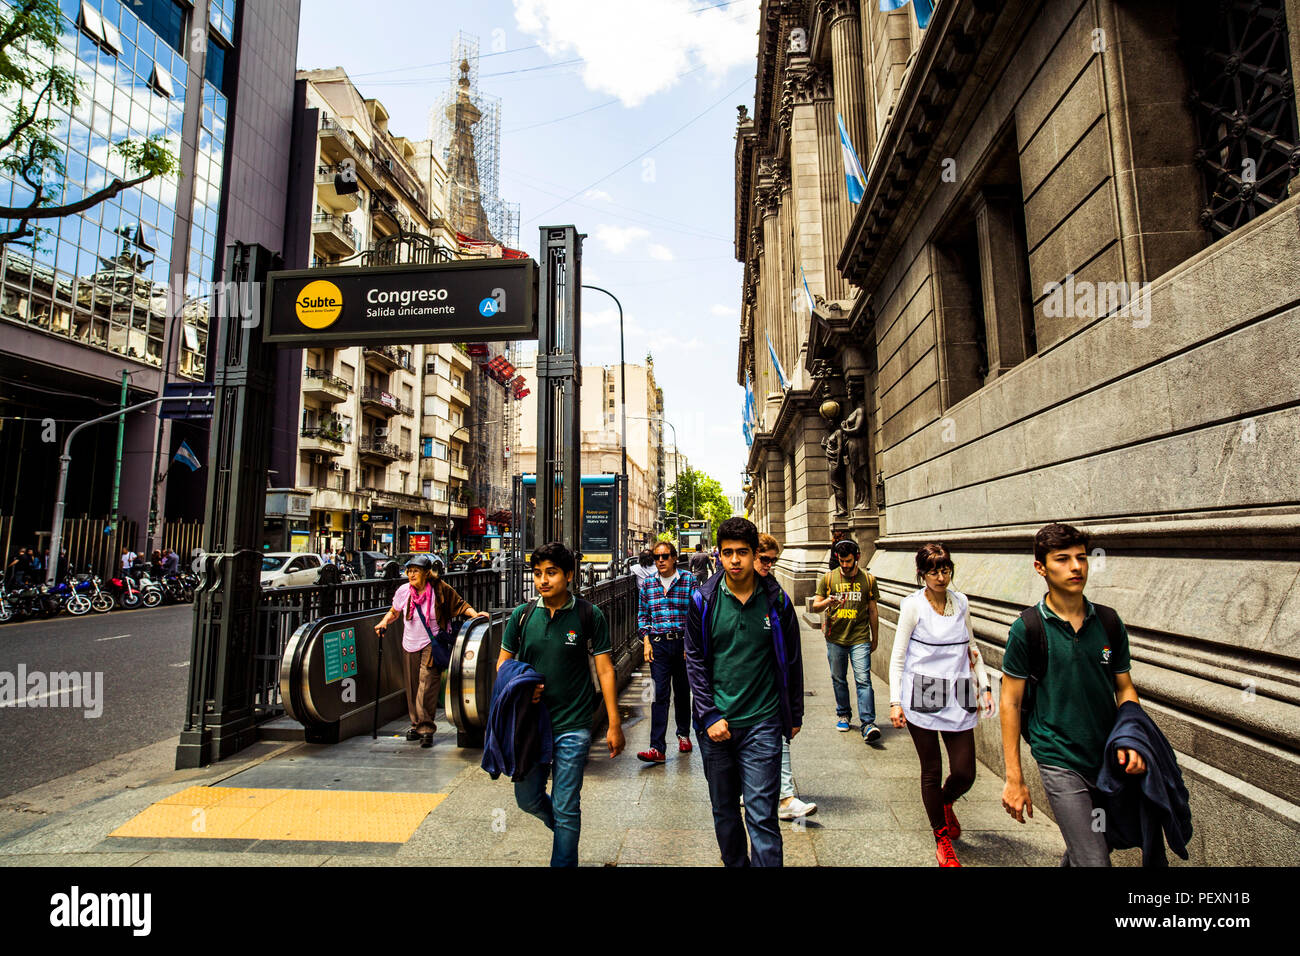 Street scene in Buenos Aires, Argentina Stock Photo